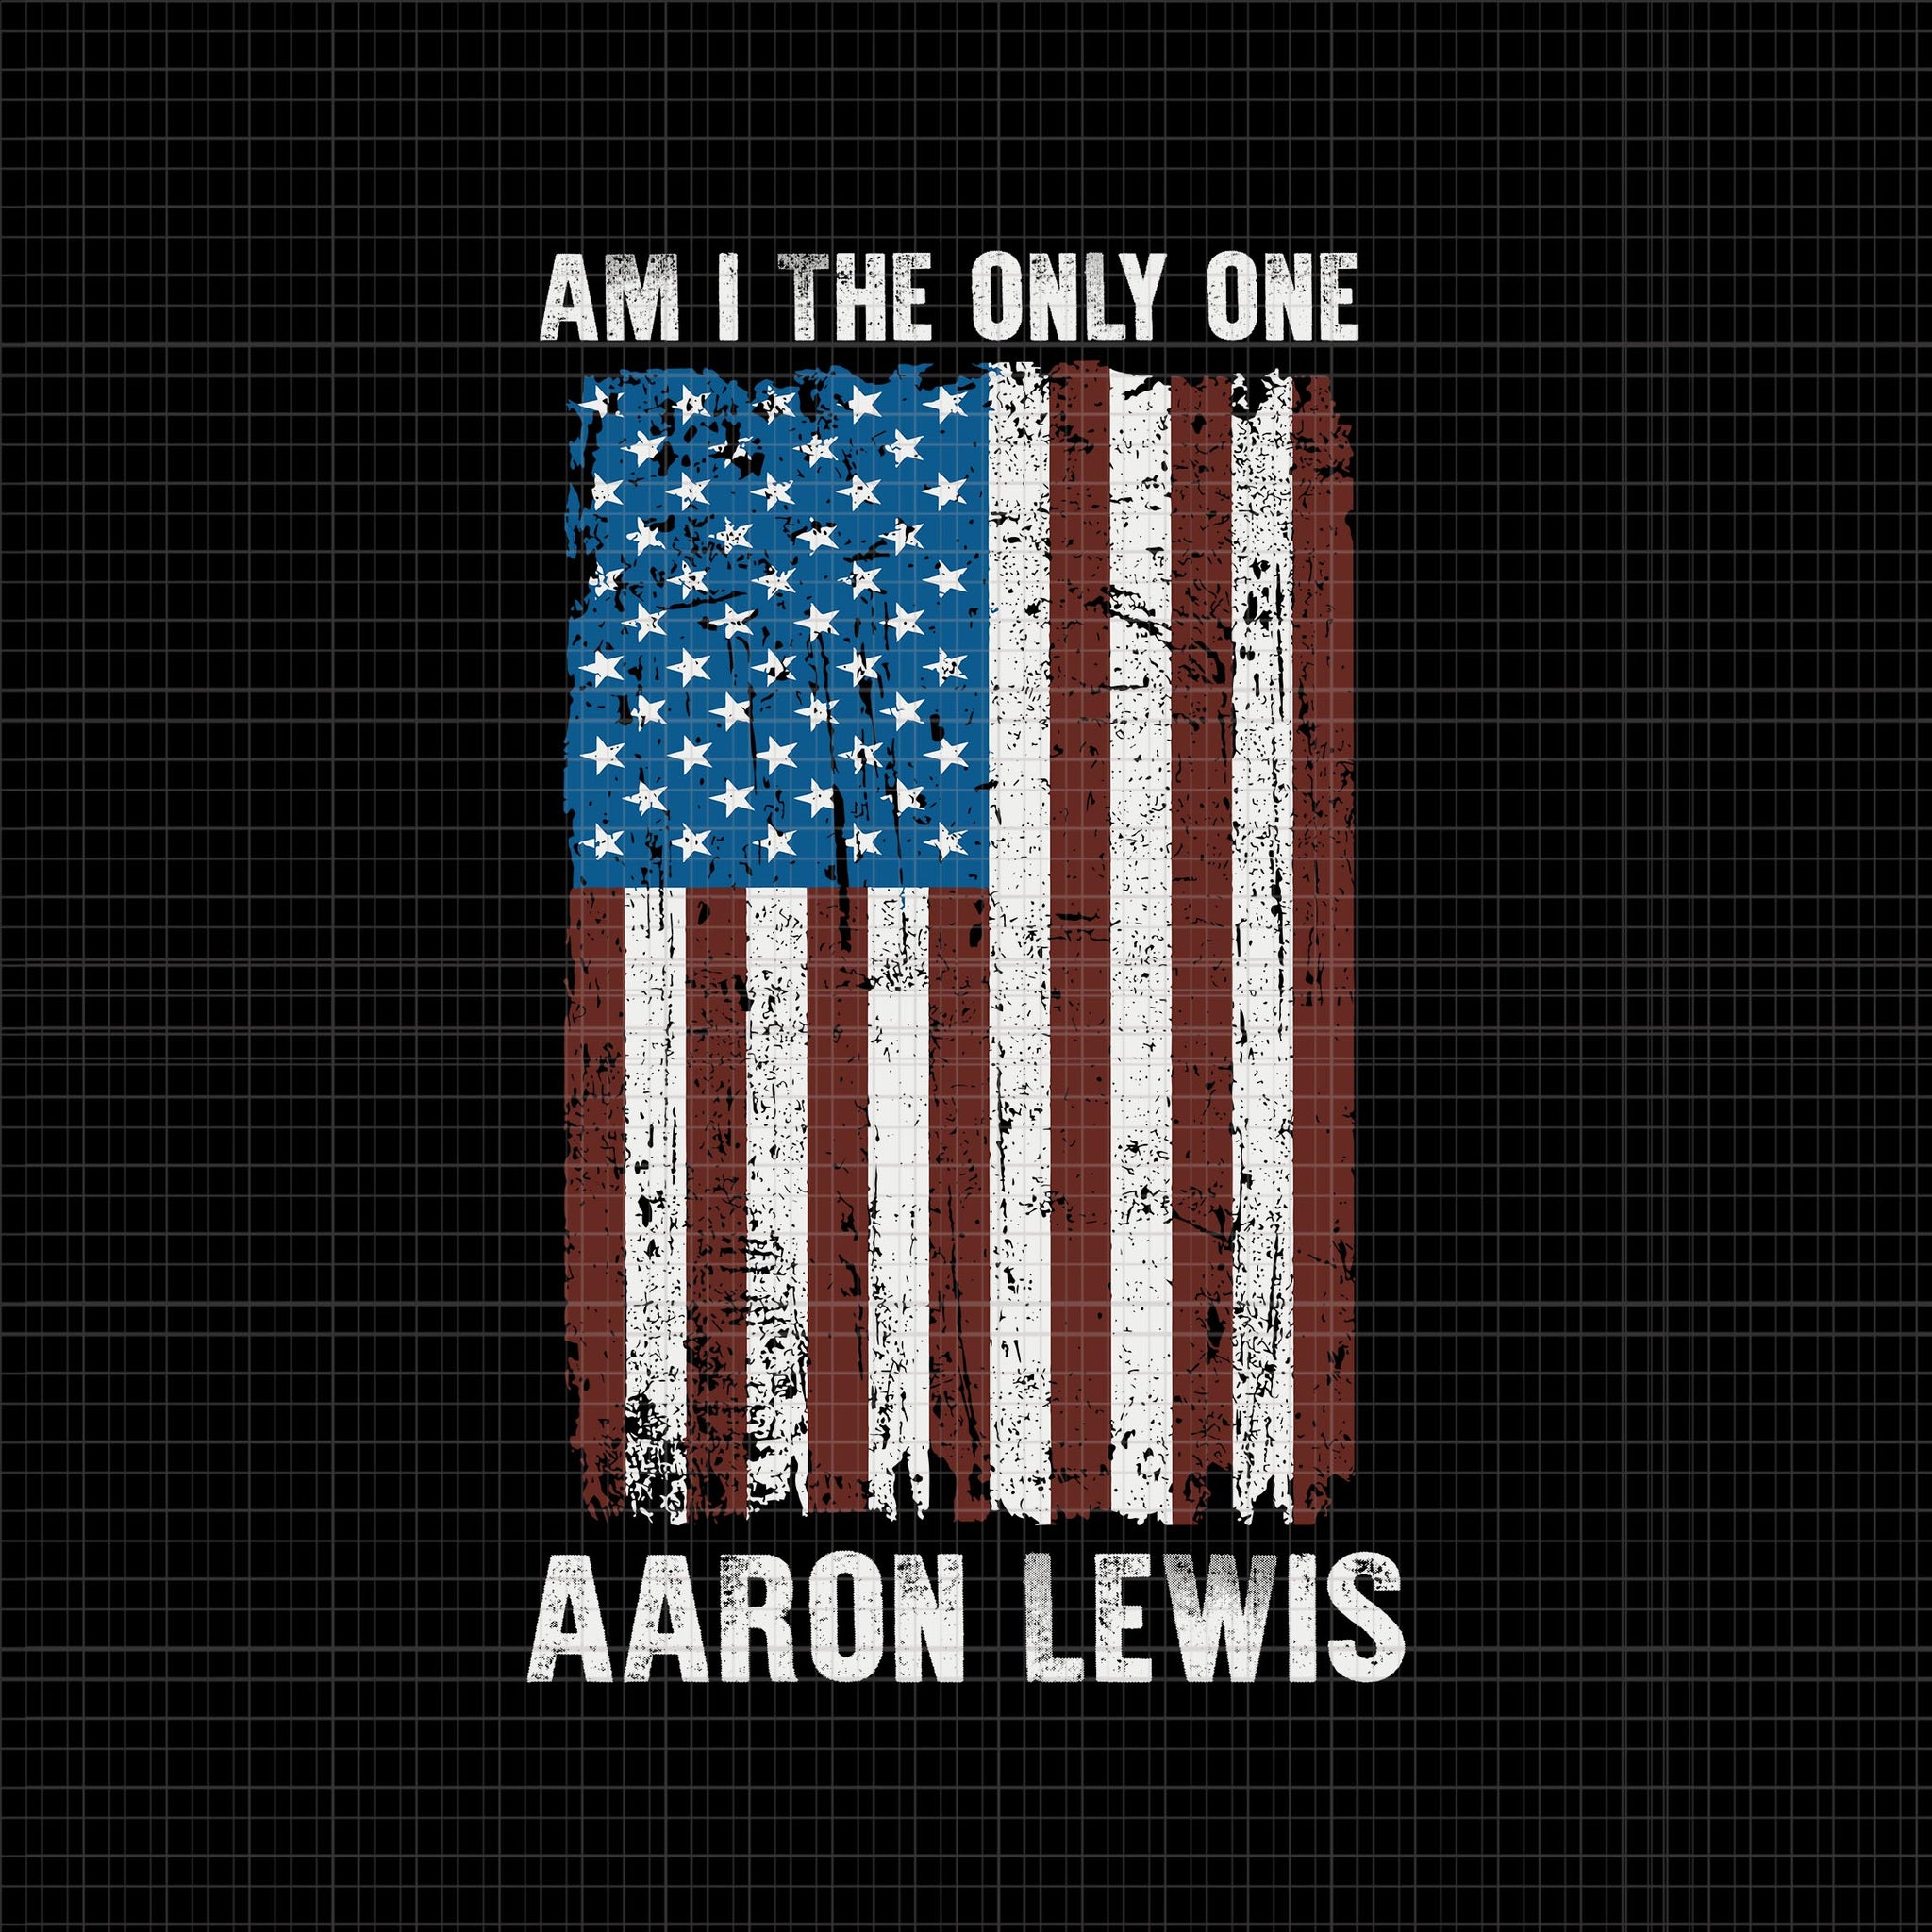 Aaron Lewis - Am I The Only One SVG, Aaron Lewis SVG, 4th of July vector, 4th of July, Am I The Only One SVG